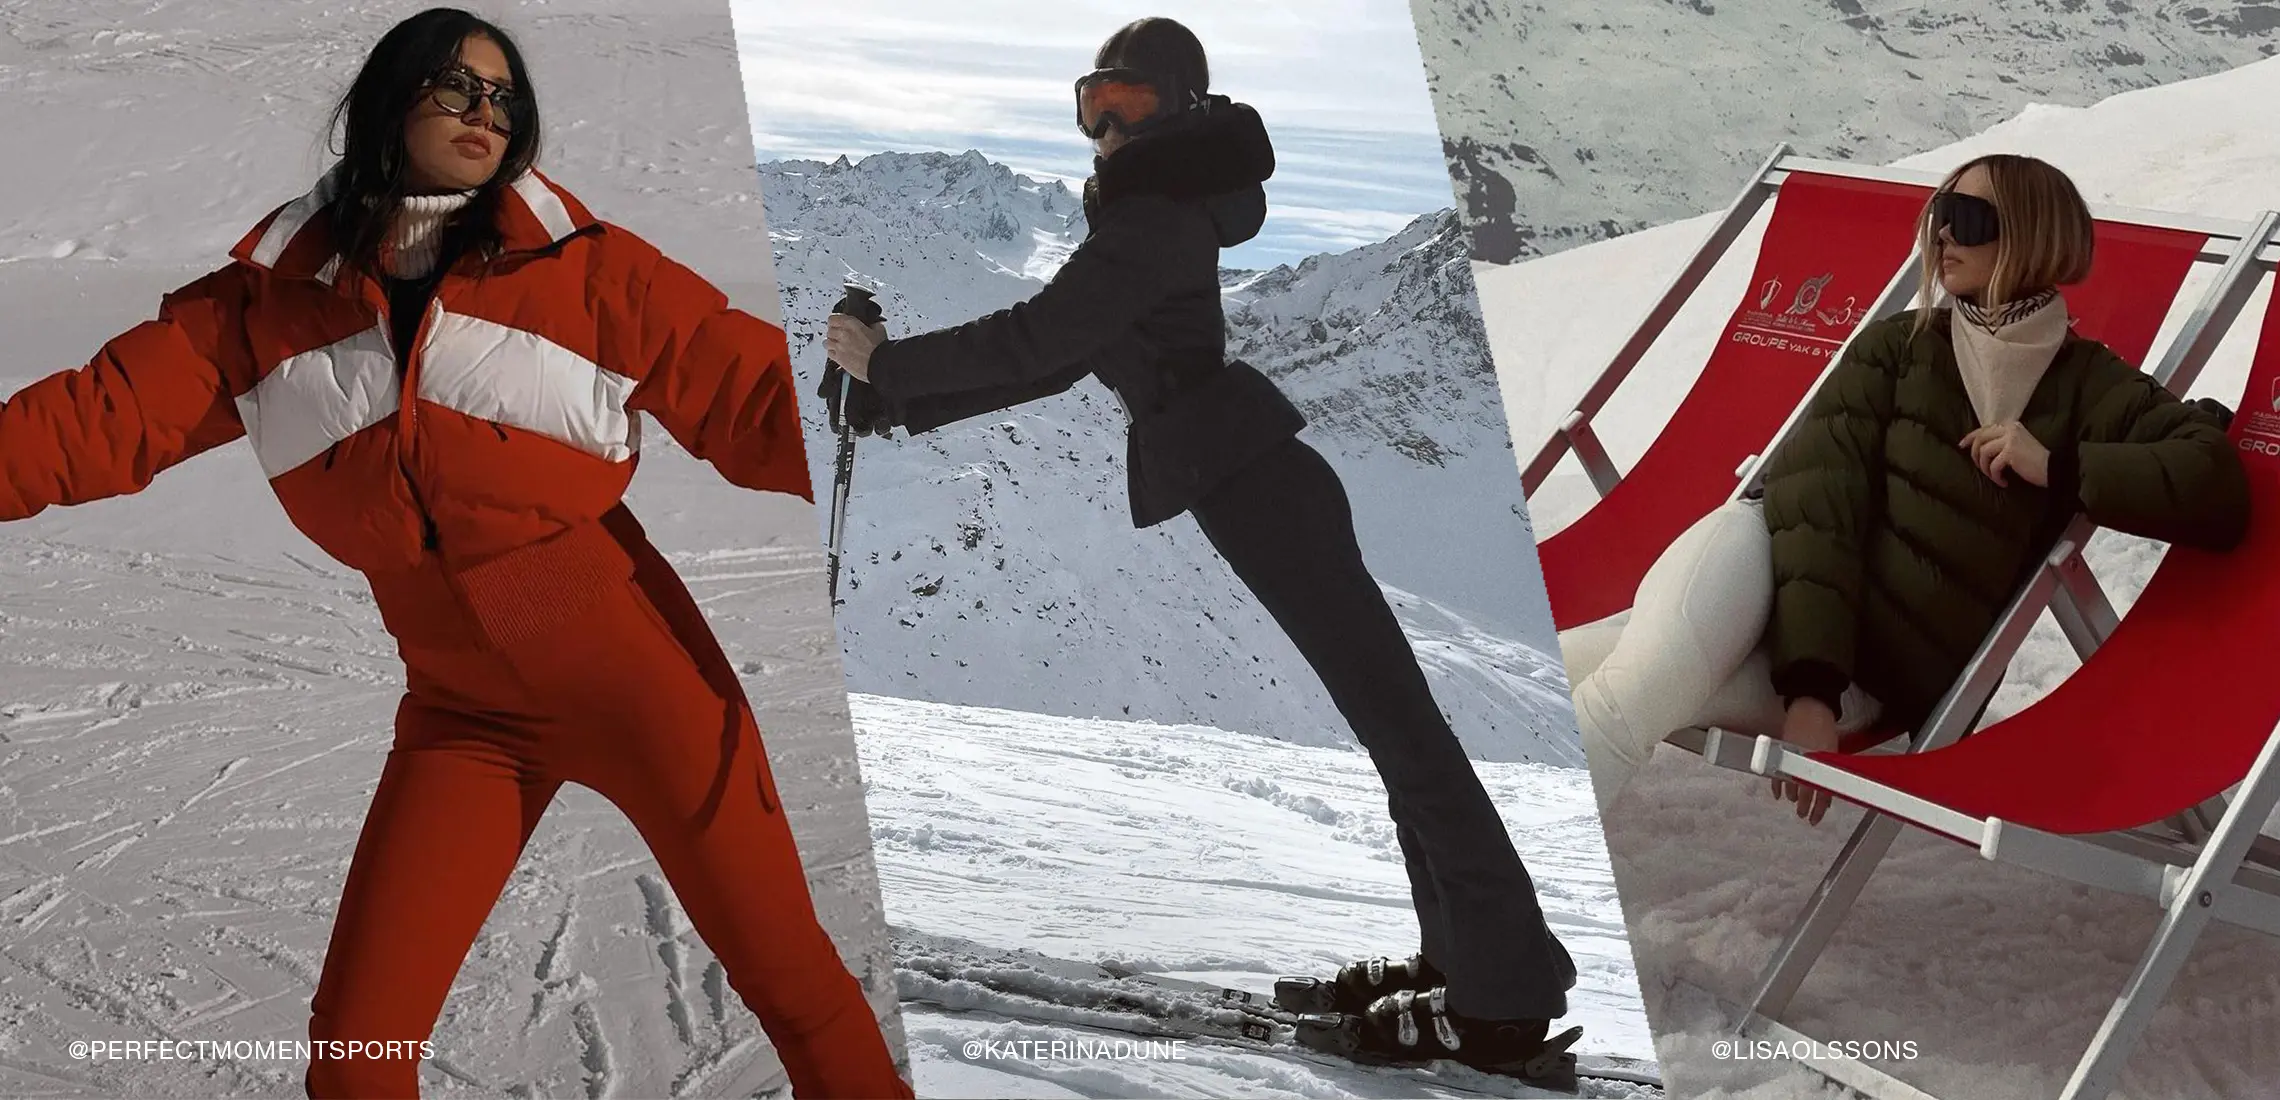 Header - A carousel of 3 skiing outfits